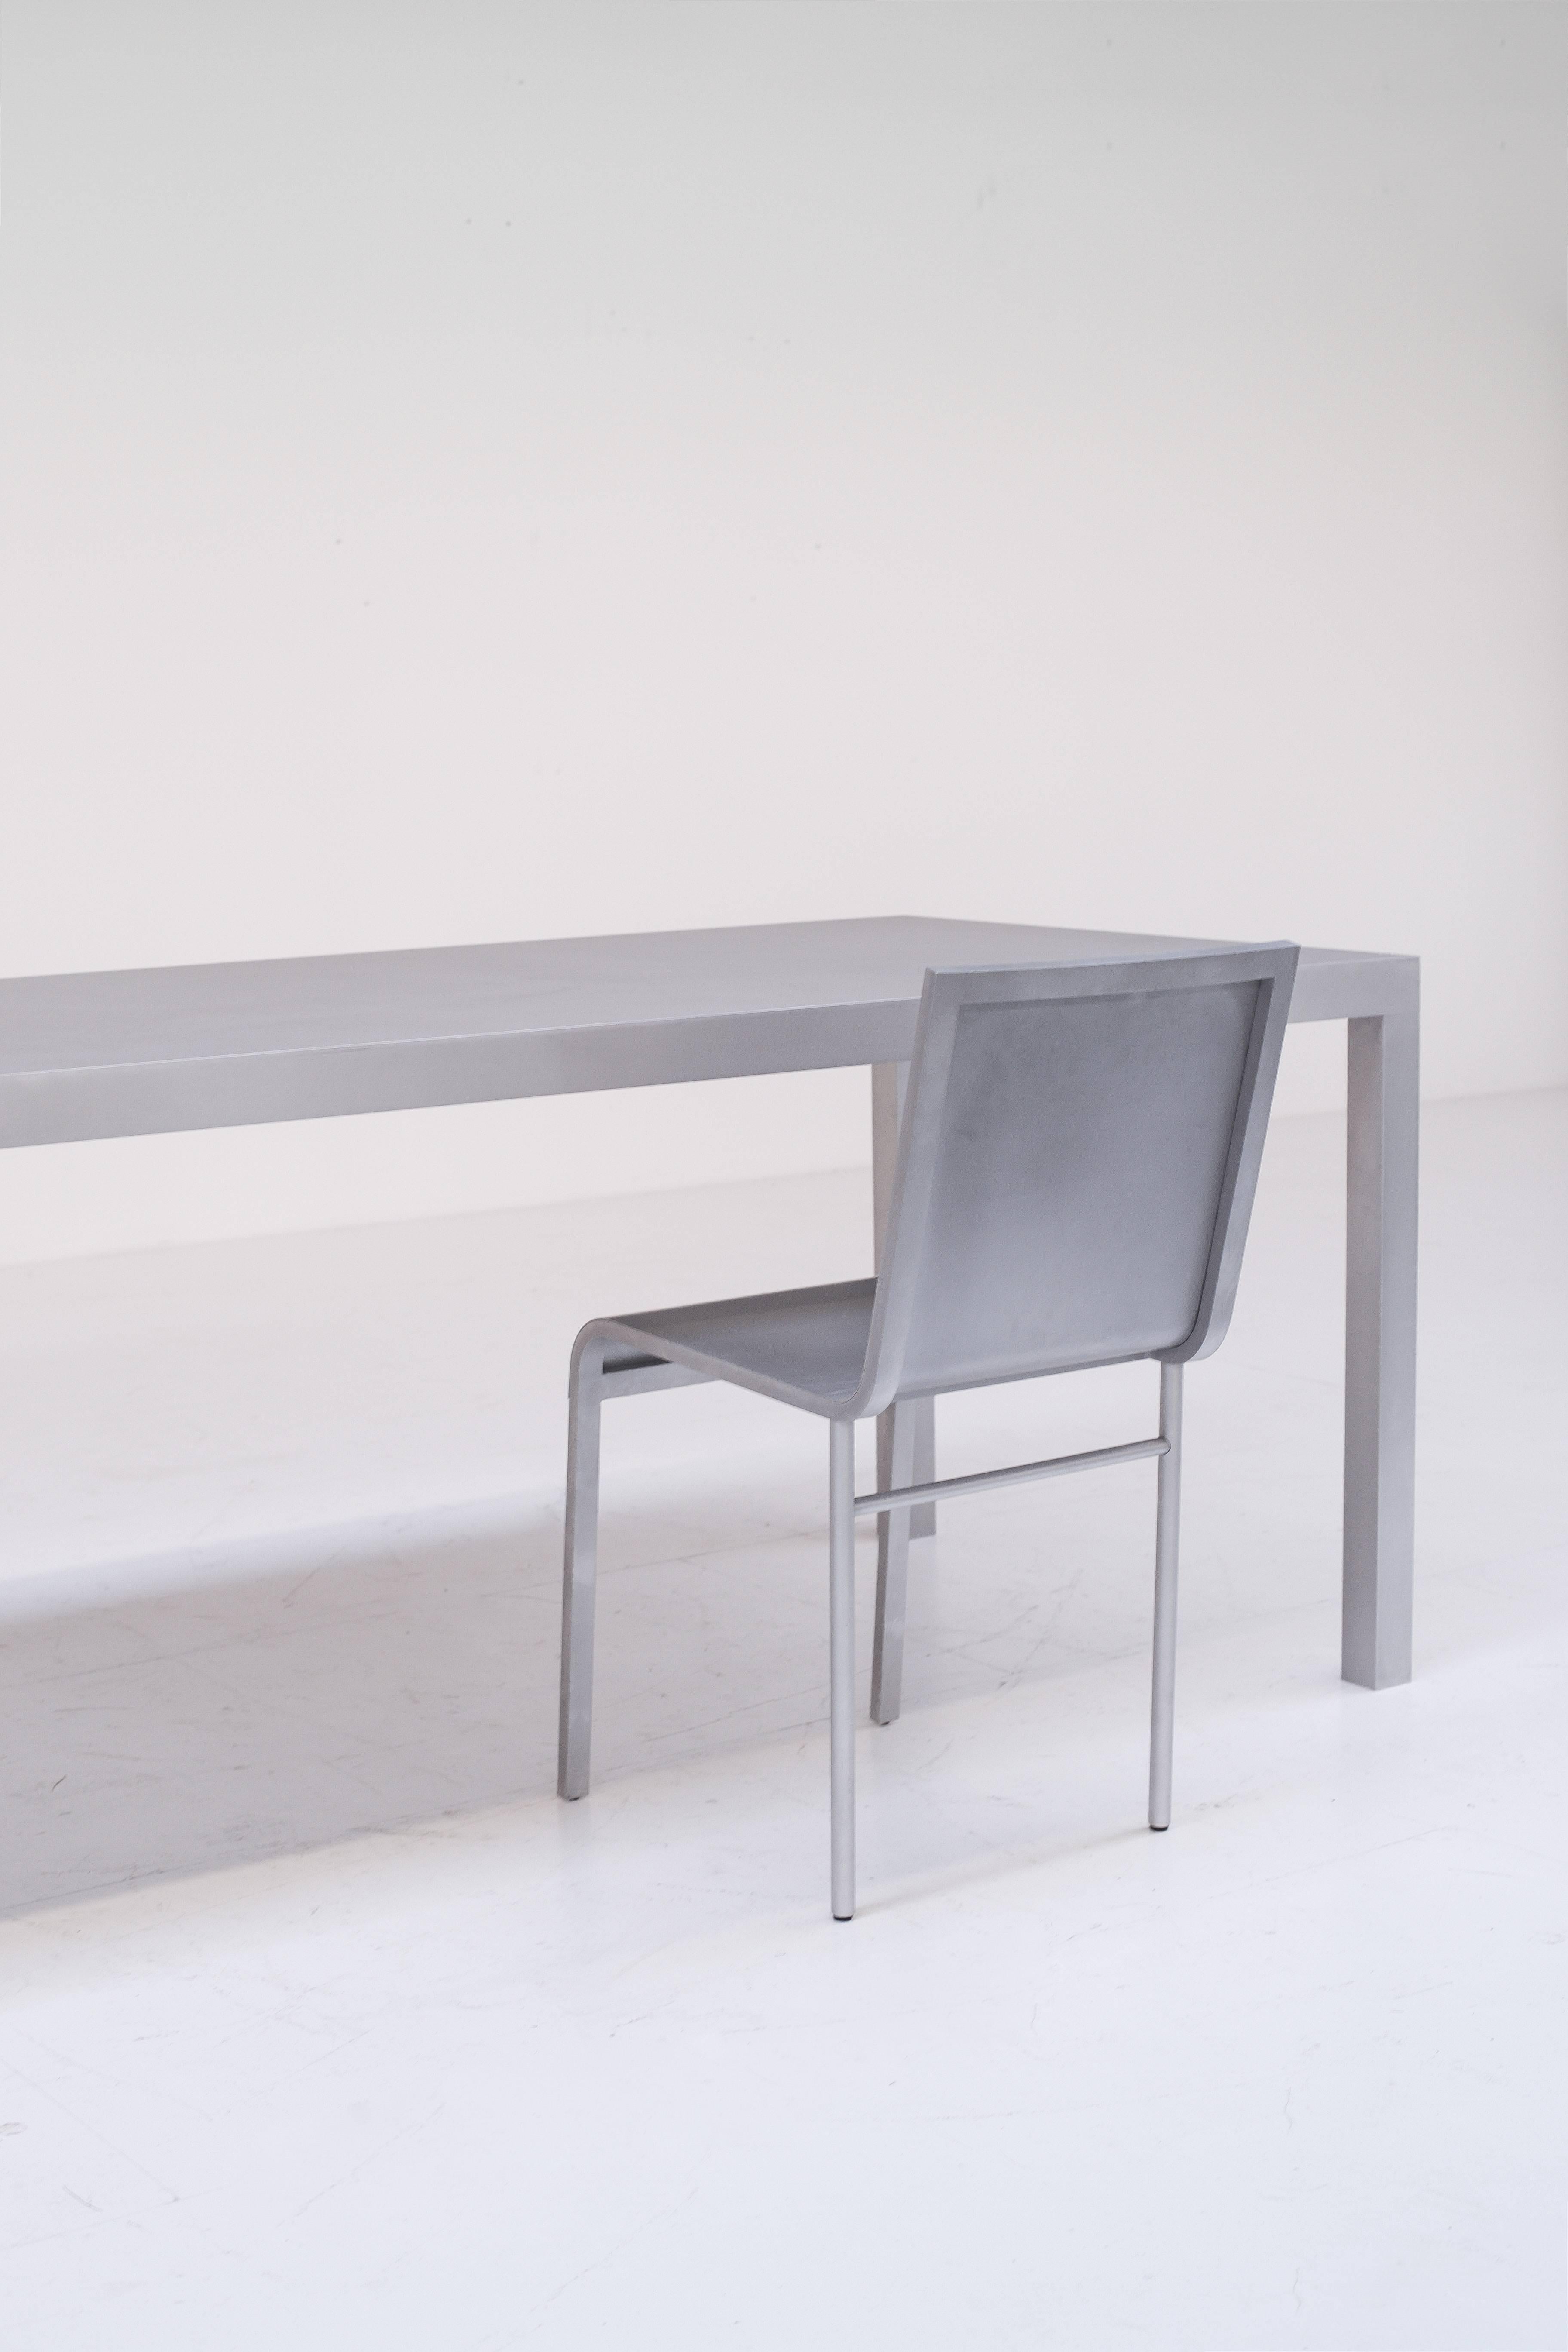 Dining table, entirely made out of aluminium, 1990s.
Purchased by the previous owner at Top Mouton, early production.
A very recognizable Maarten van Severen piece.